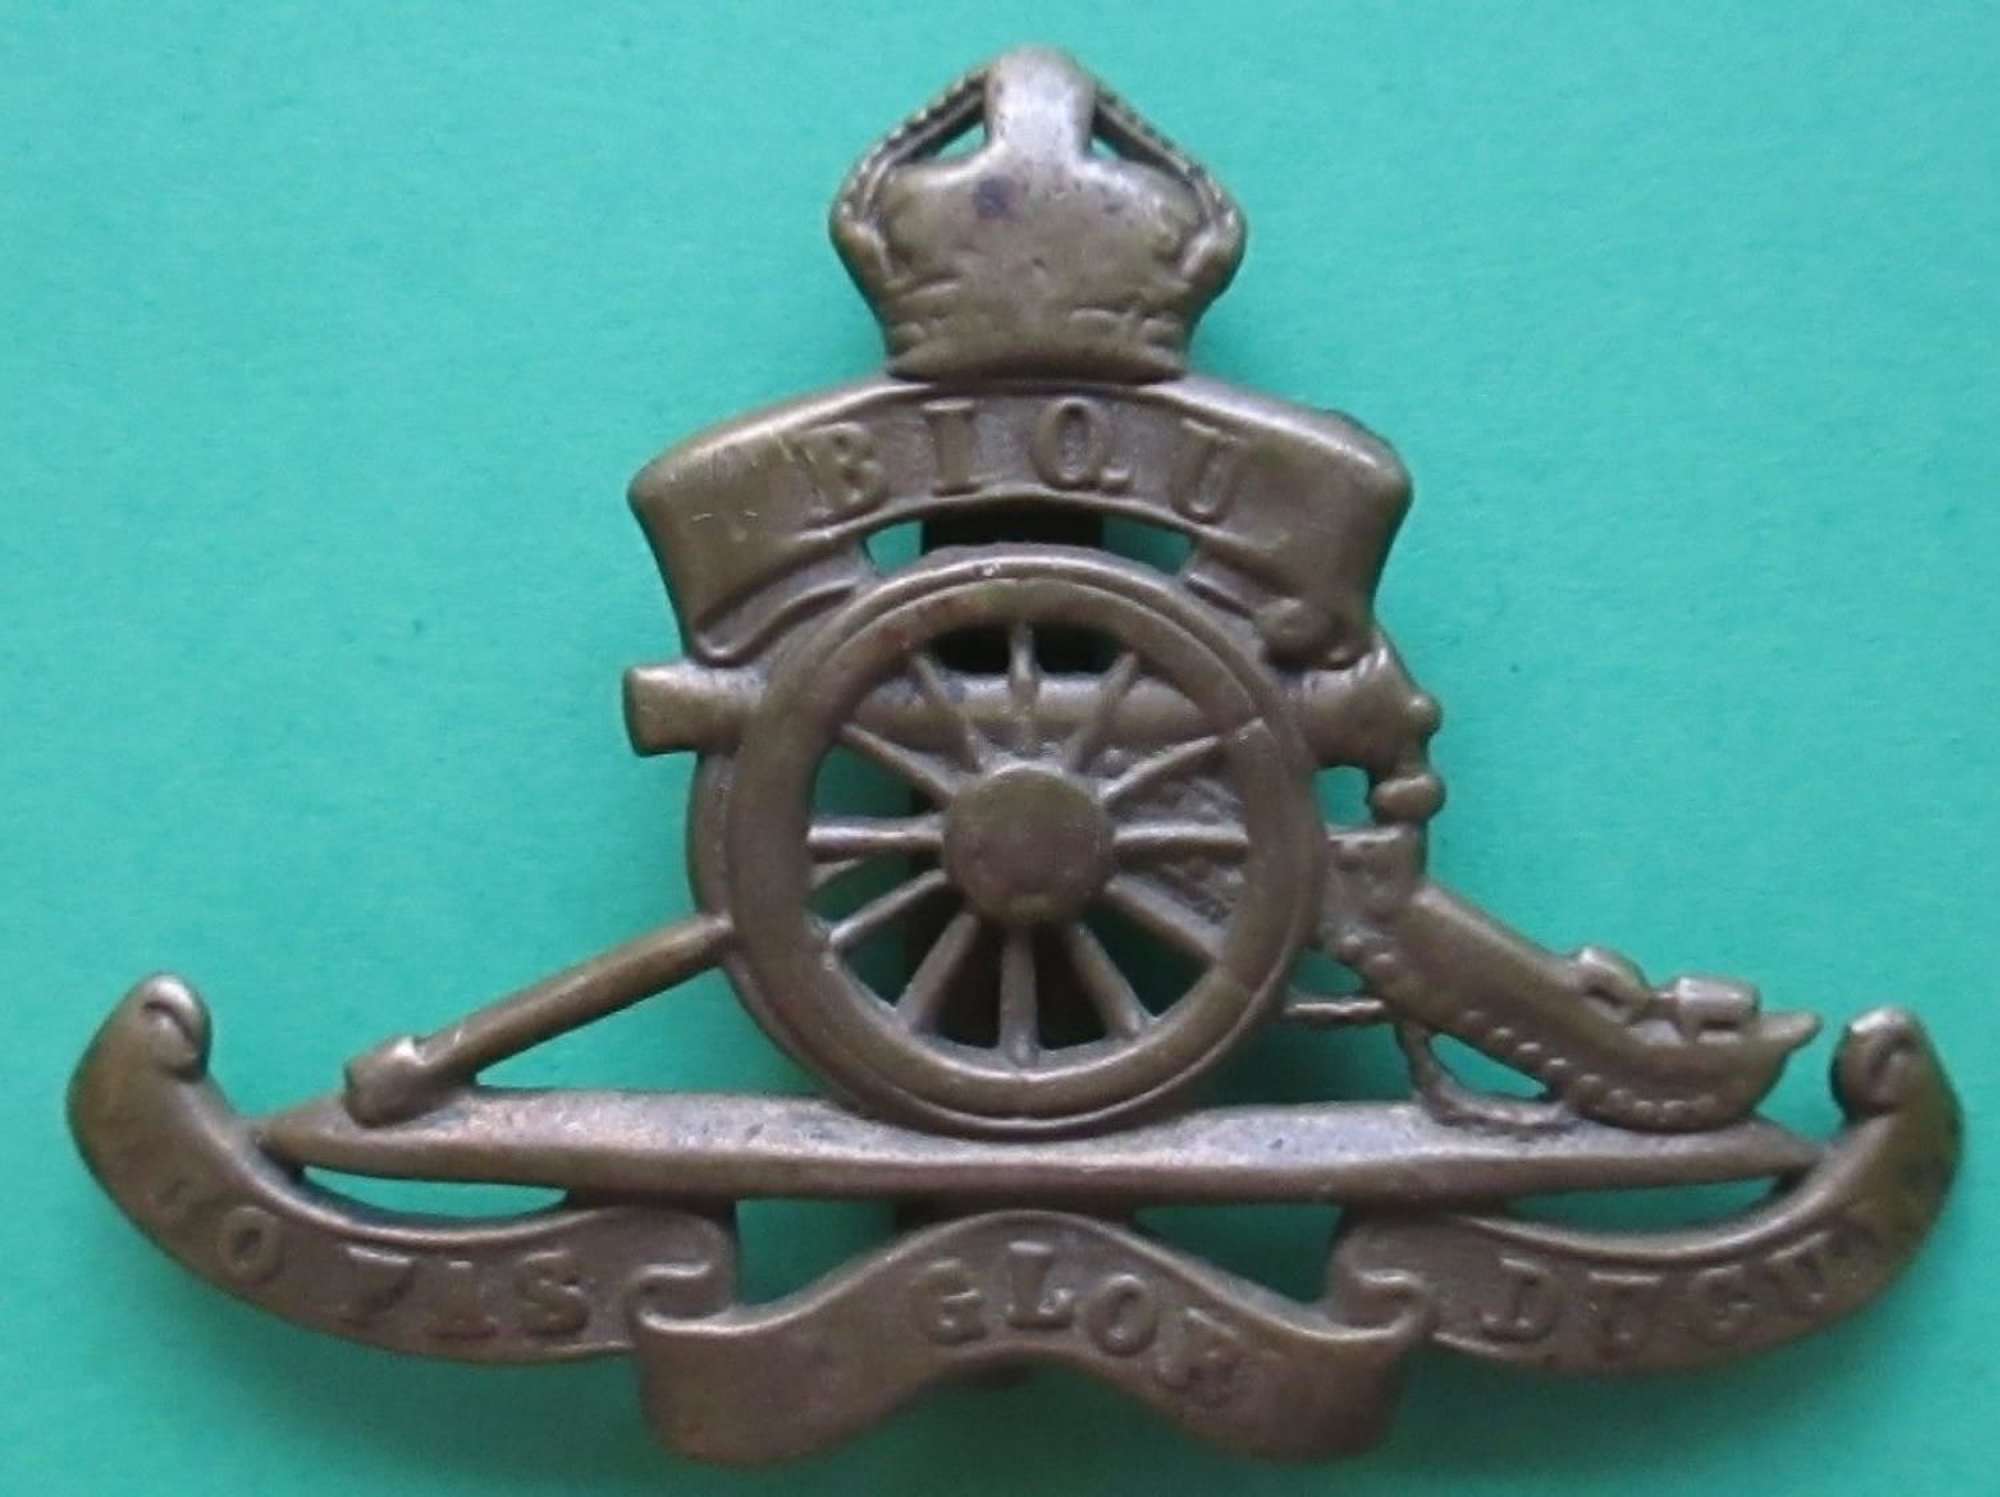 A ROYAL ARTILLERY OTHER RANKS CAP BADGE NUMBERED